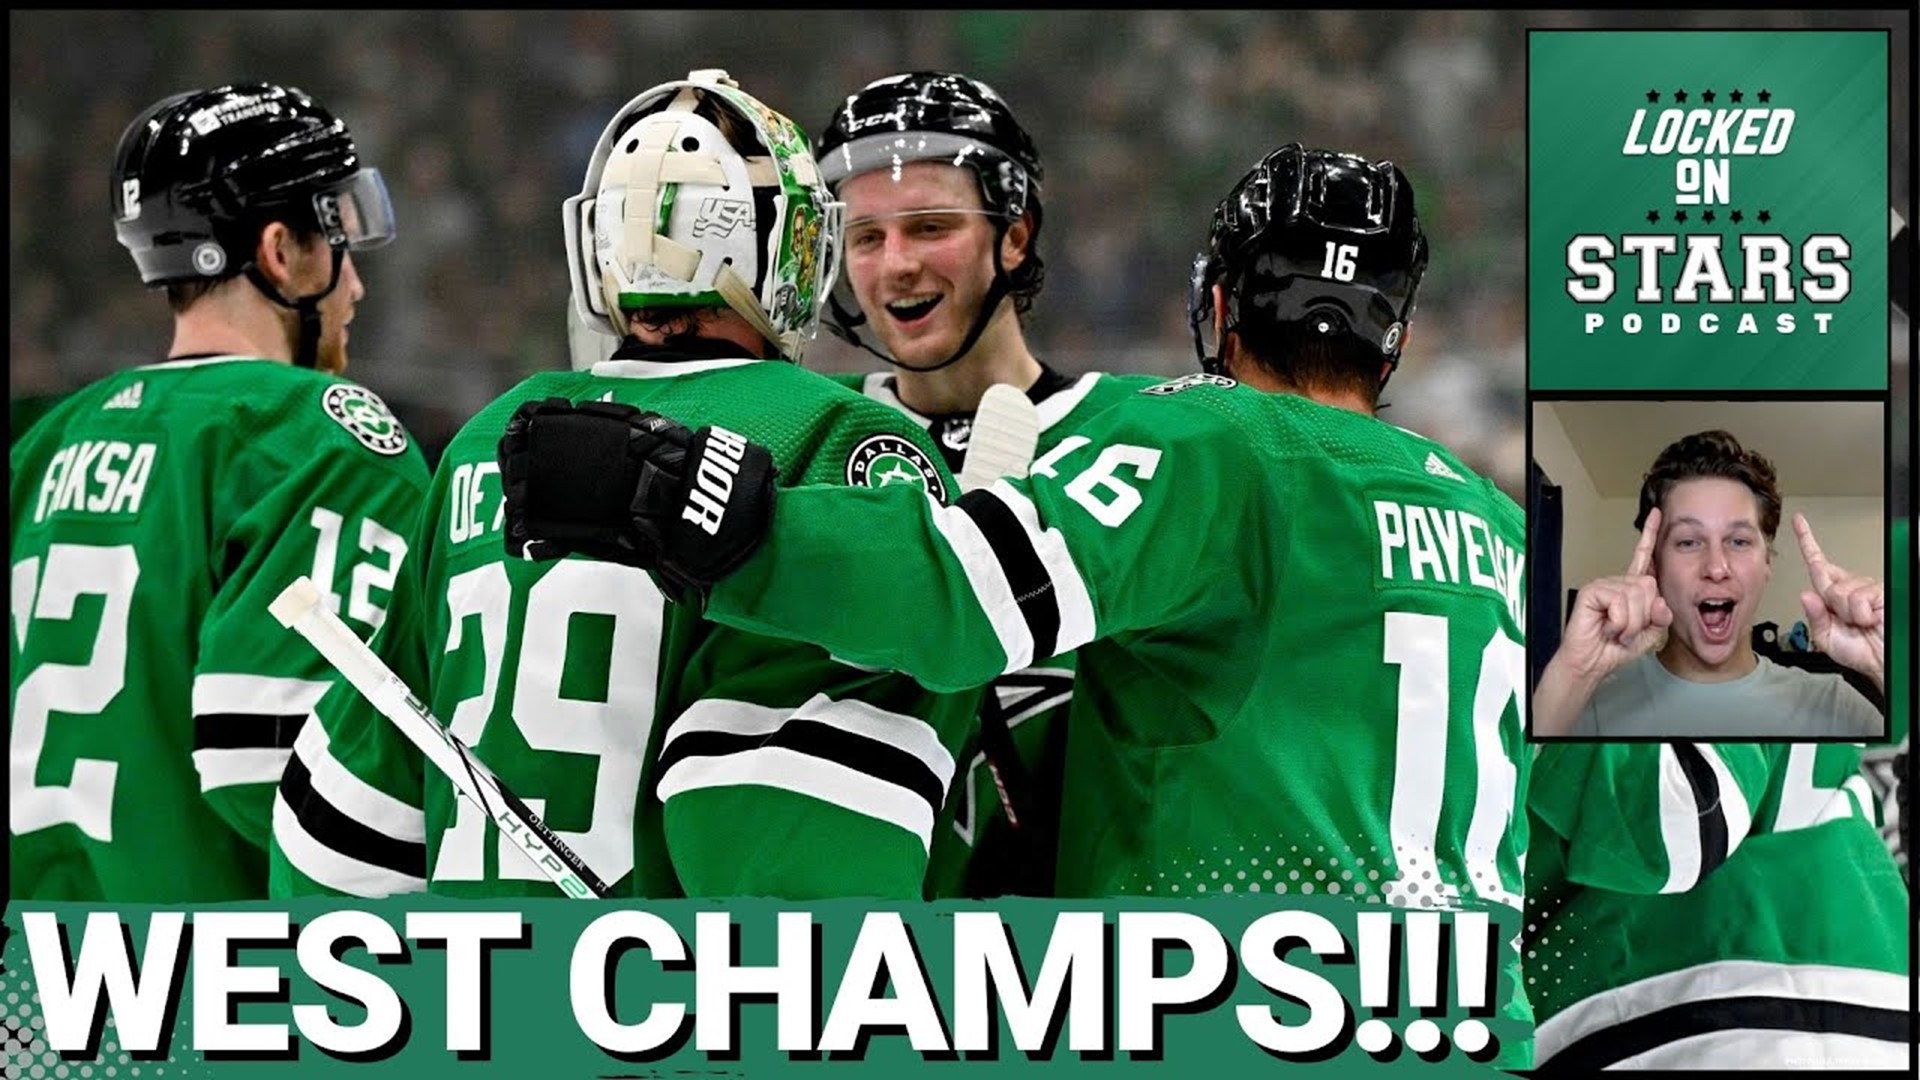 Jake Oettinger and the Dallas Stars defeat the St. Louis Blues 2-1 in a shootout to win the Western Conference!